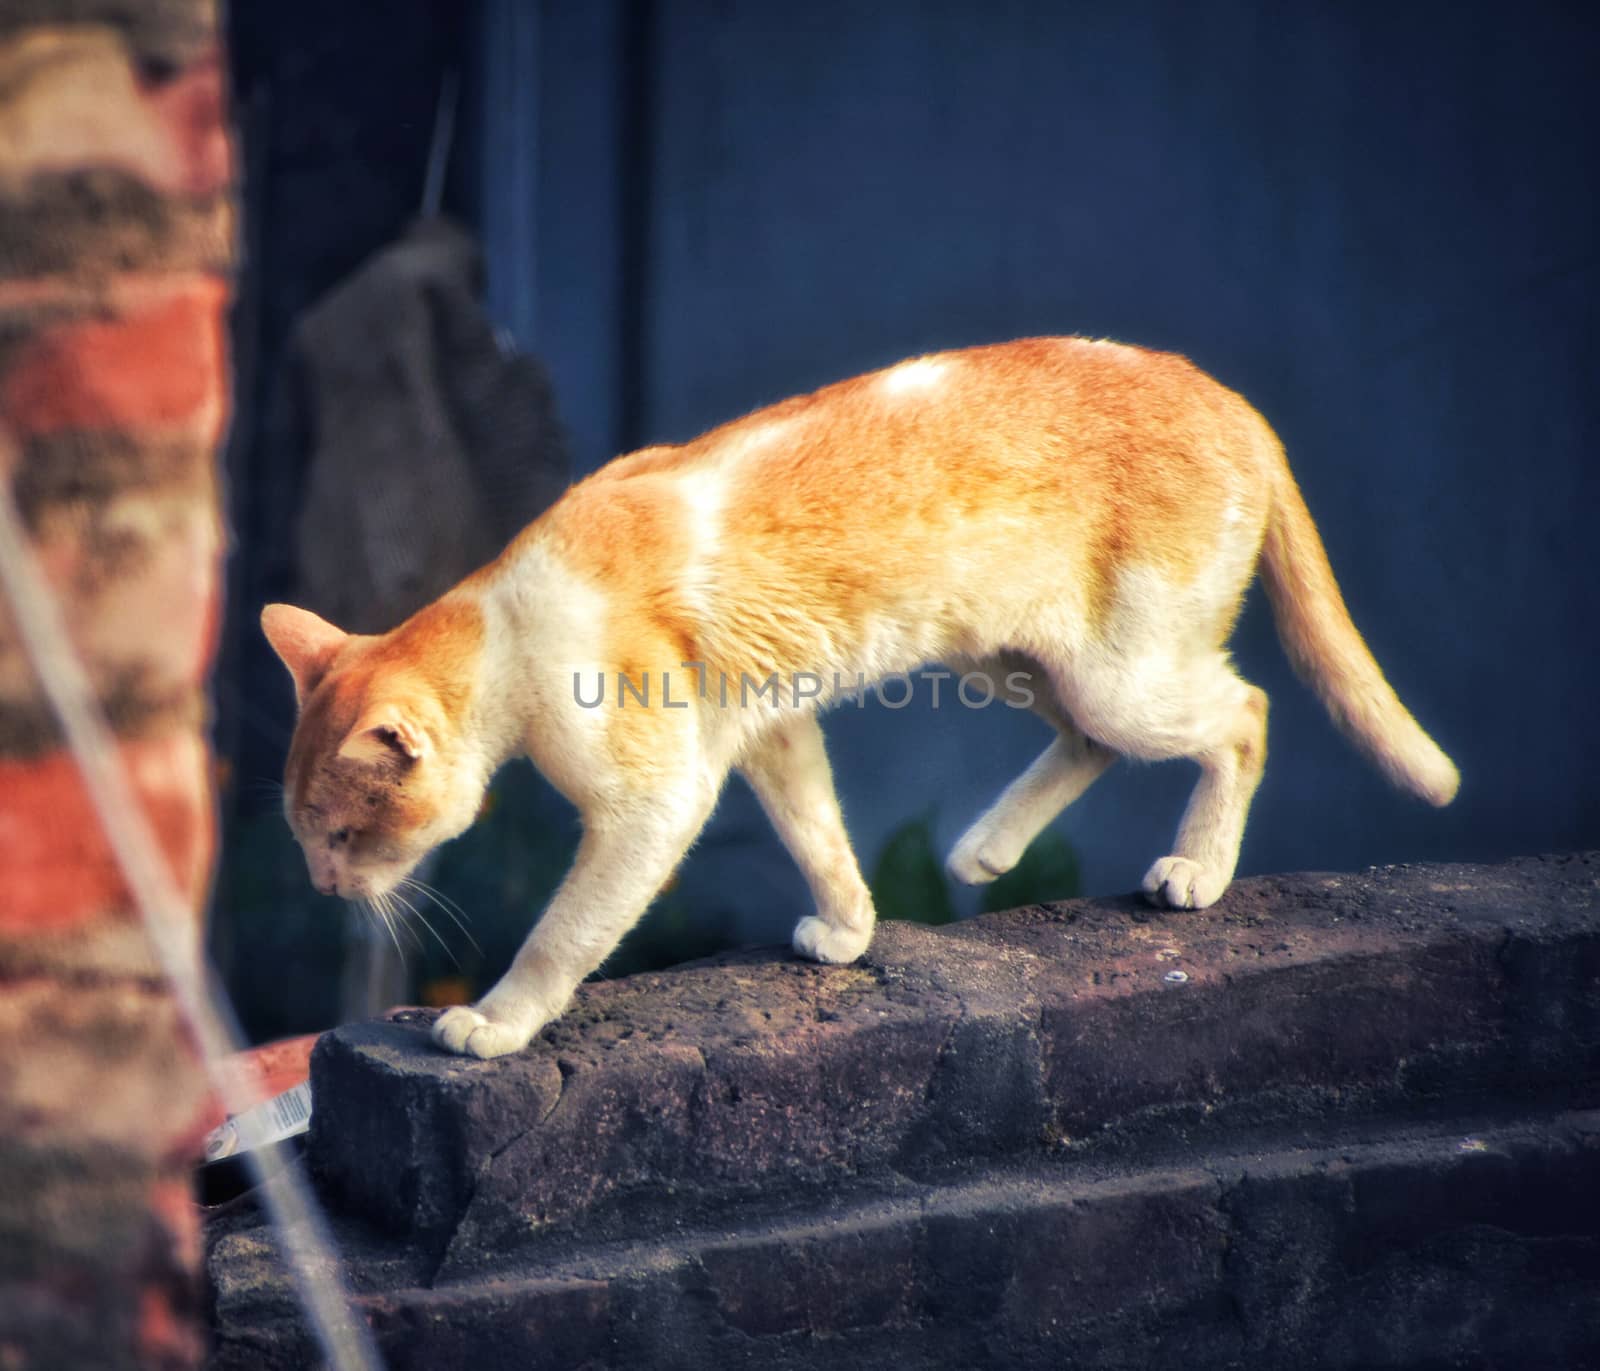 A cute cat walking on a wall and going somewhere. It was an early morning and perhaps it was going to search its breakfast